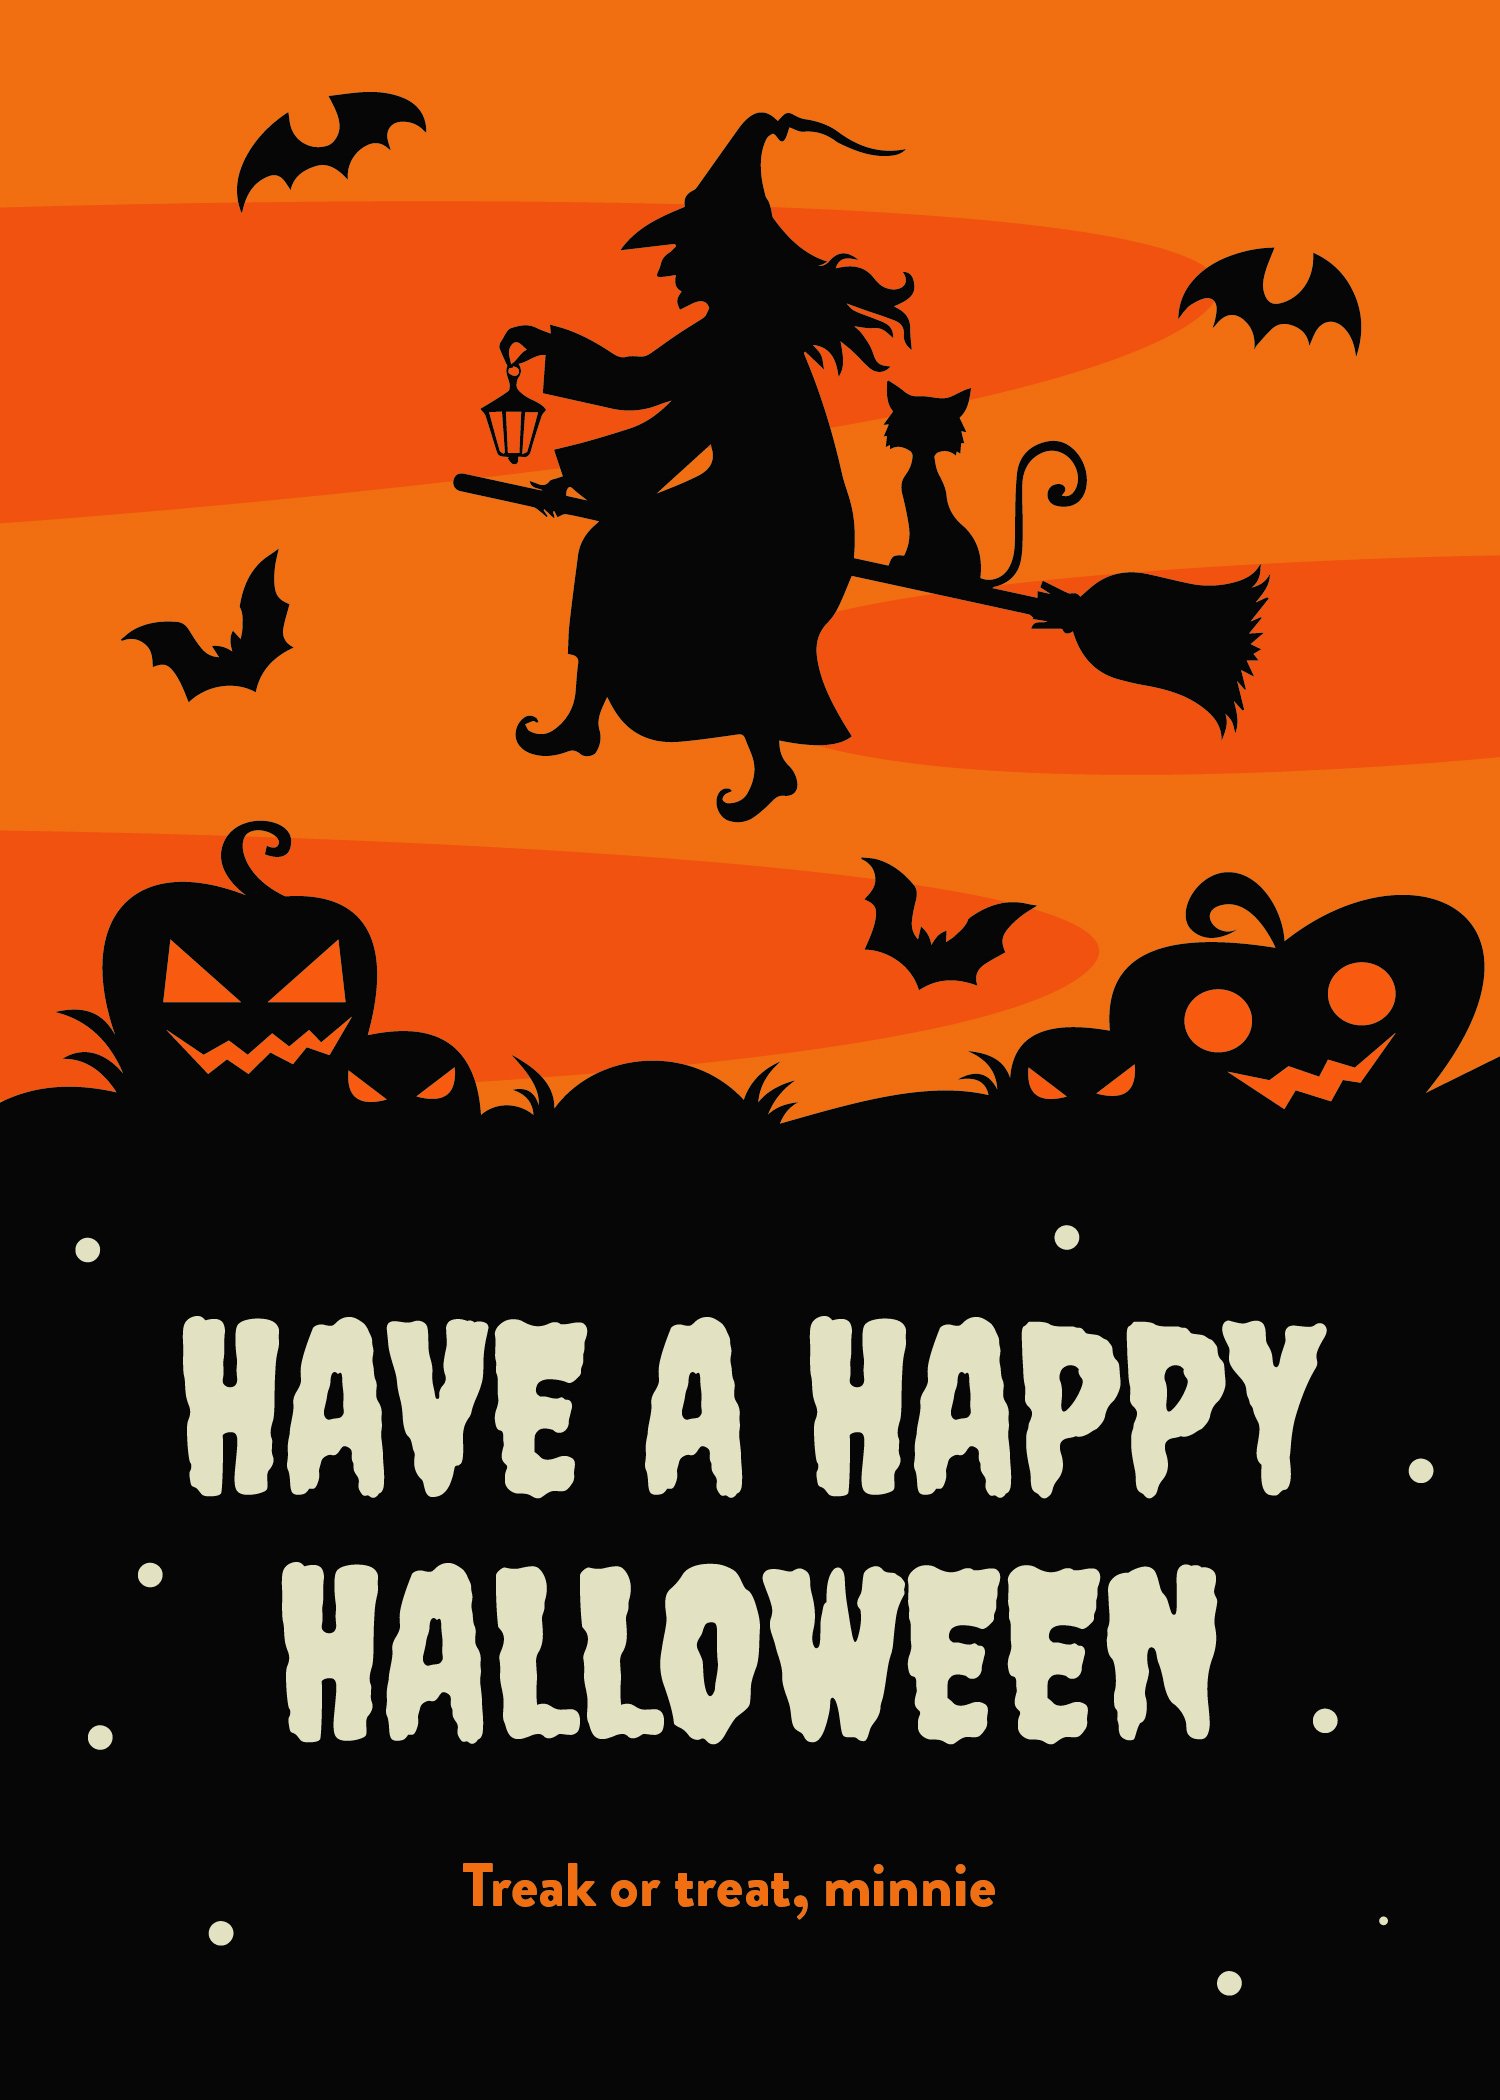 Free Halloween Day Wishes in Word, Google Docs, Illustrator, PSD, EPS, SVG, JPG, PNG